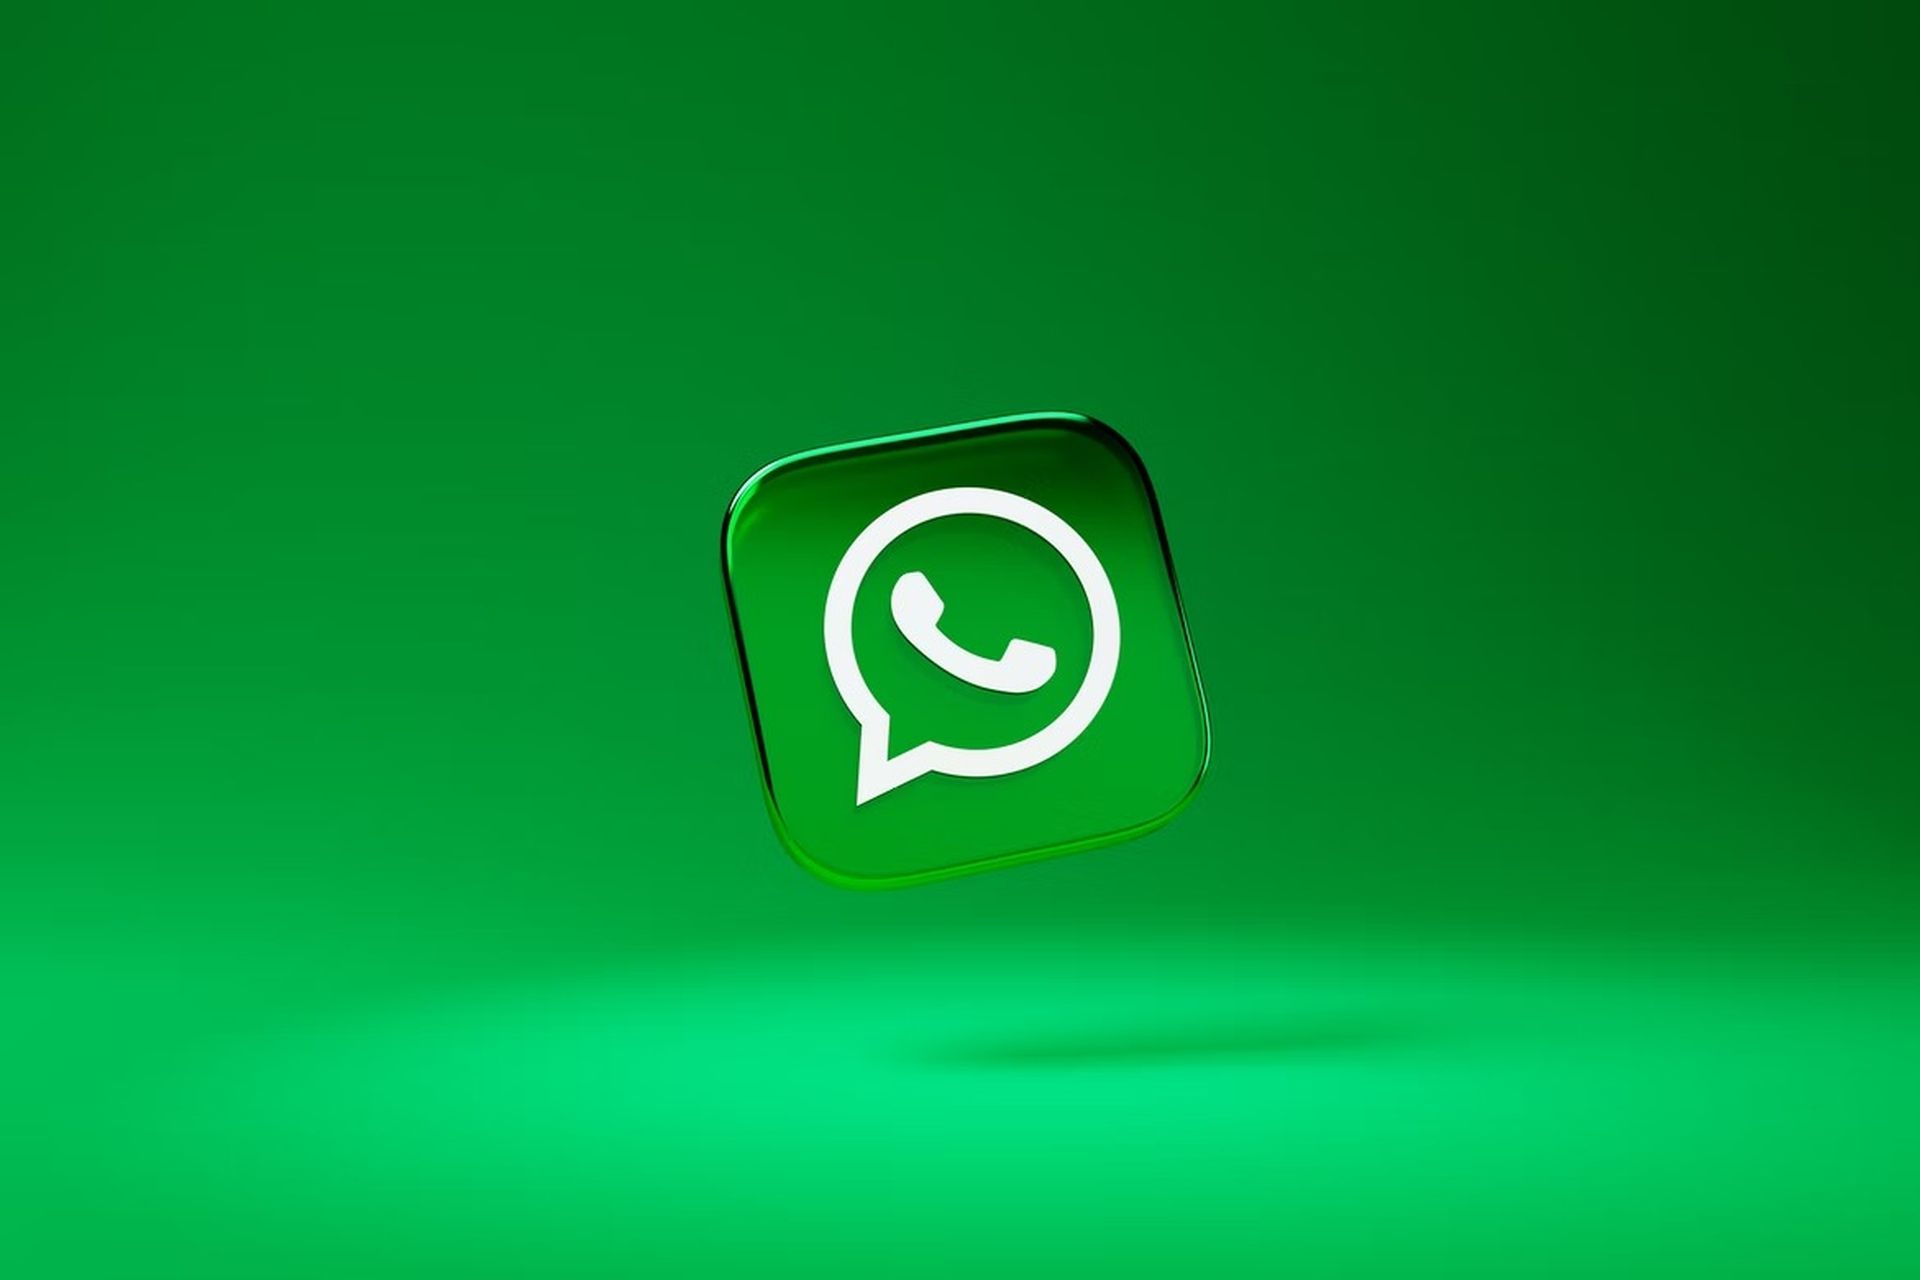 If you don't know how to send WhatsApp message without saving number, we are going to help you out.